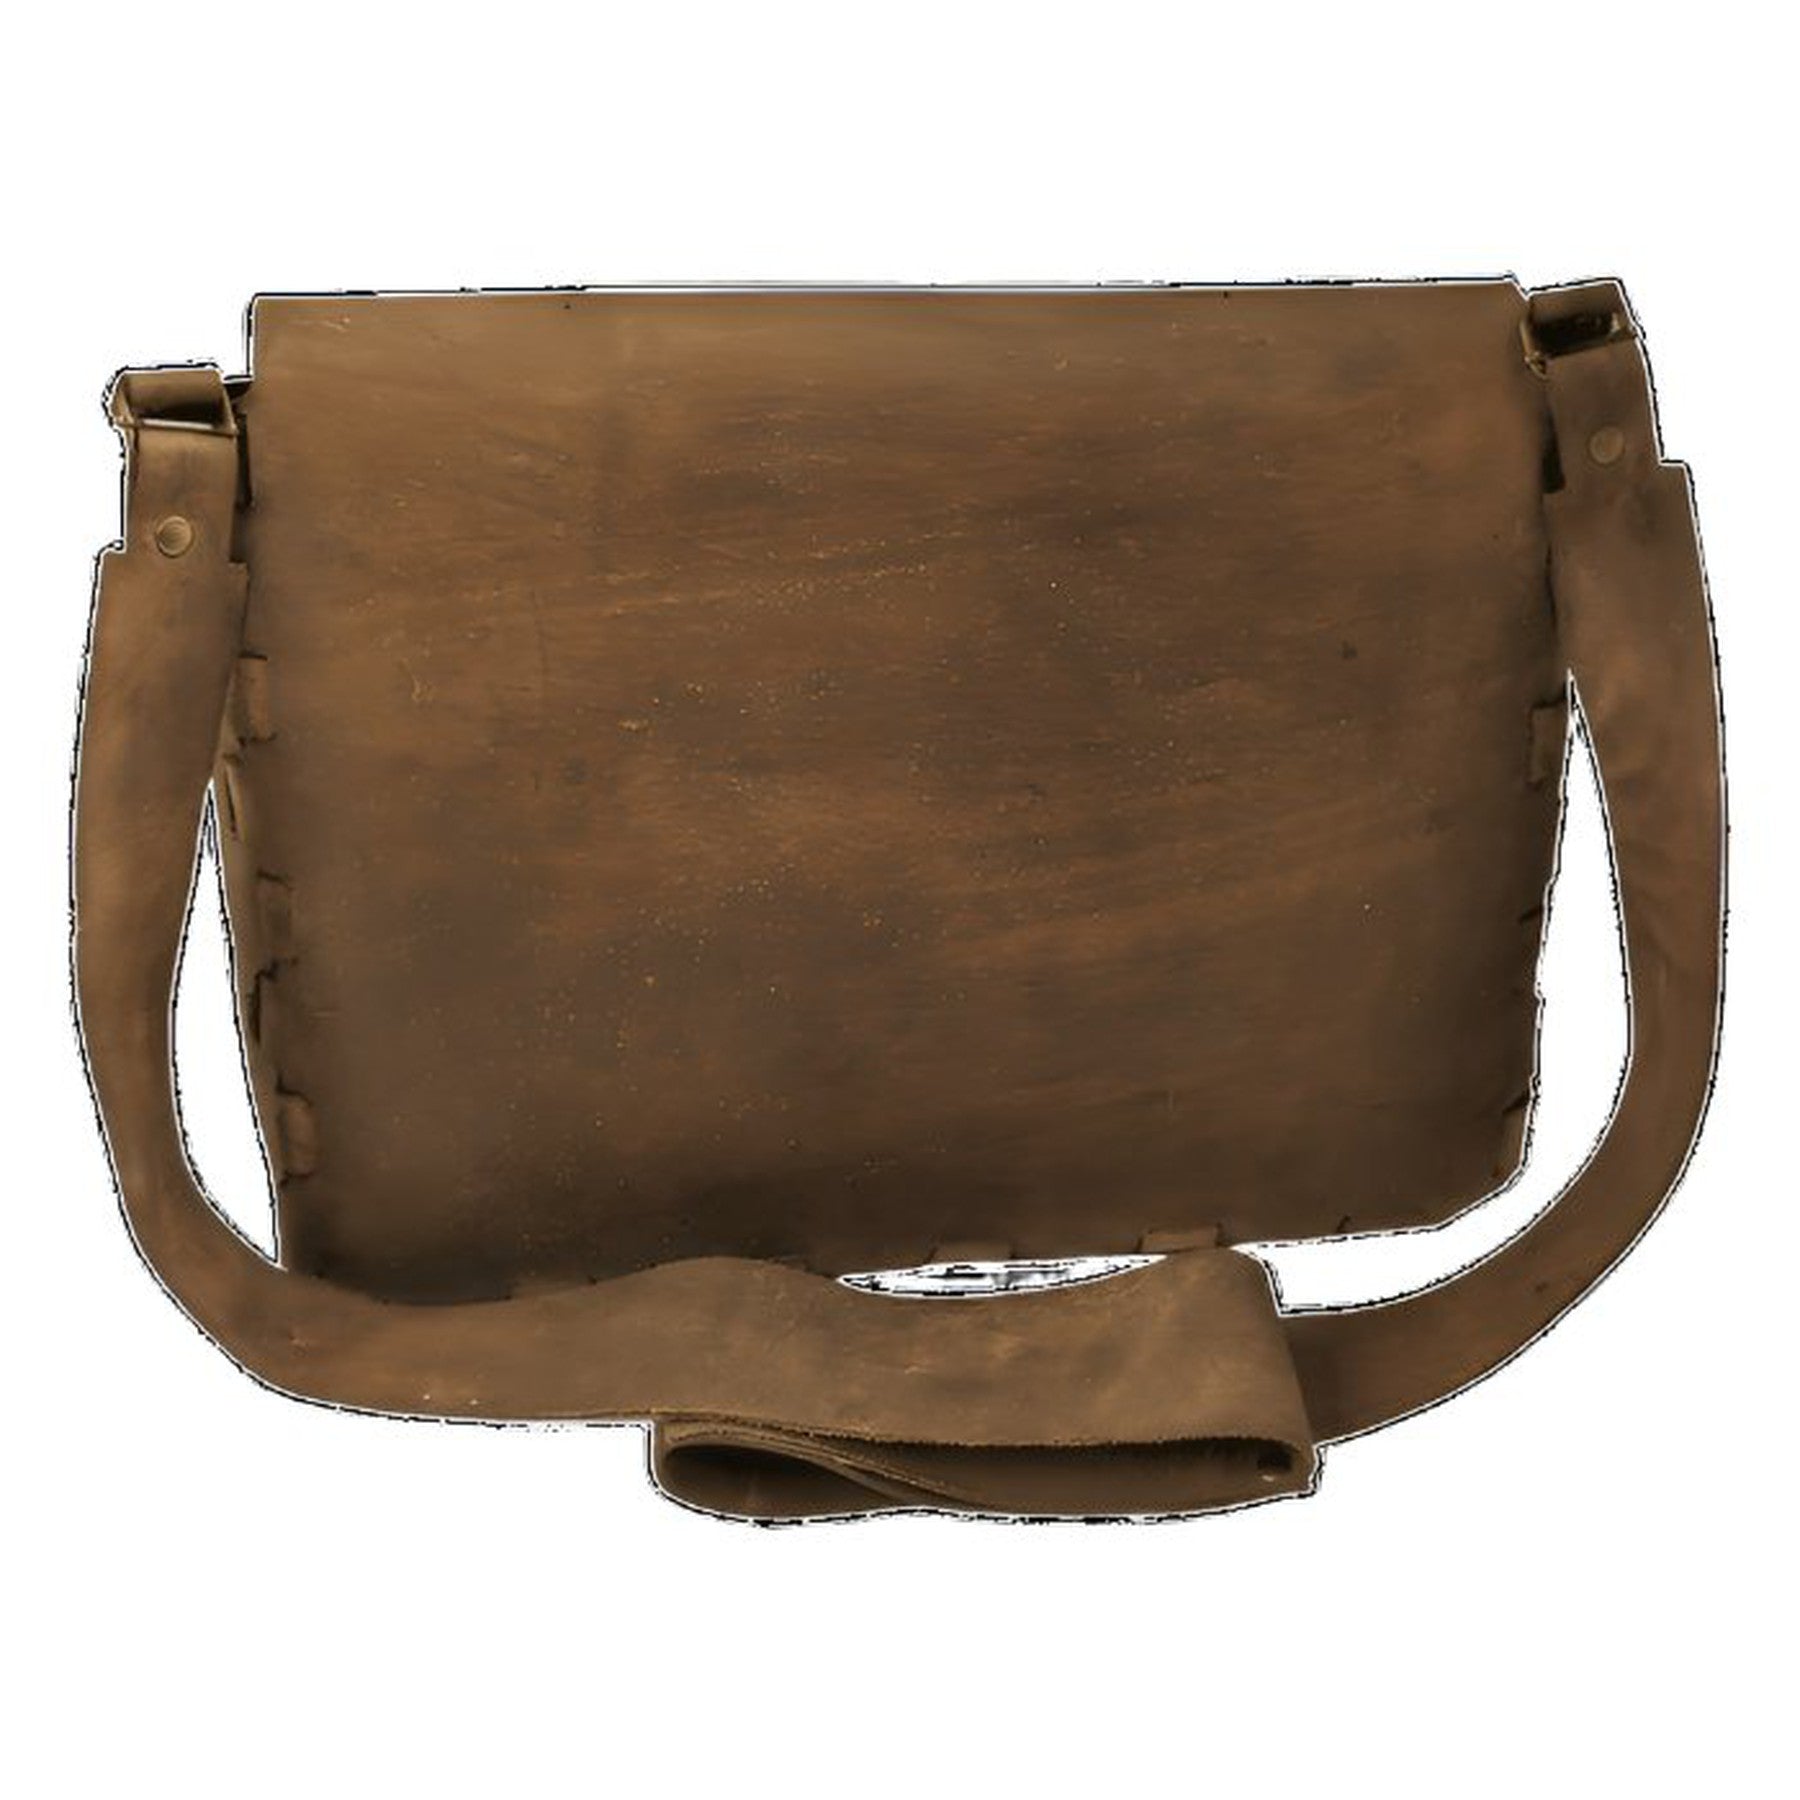 Hand-Crafted Rustic Satchel with Bronze Hardware (13" W x 10.5" H)